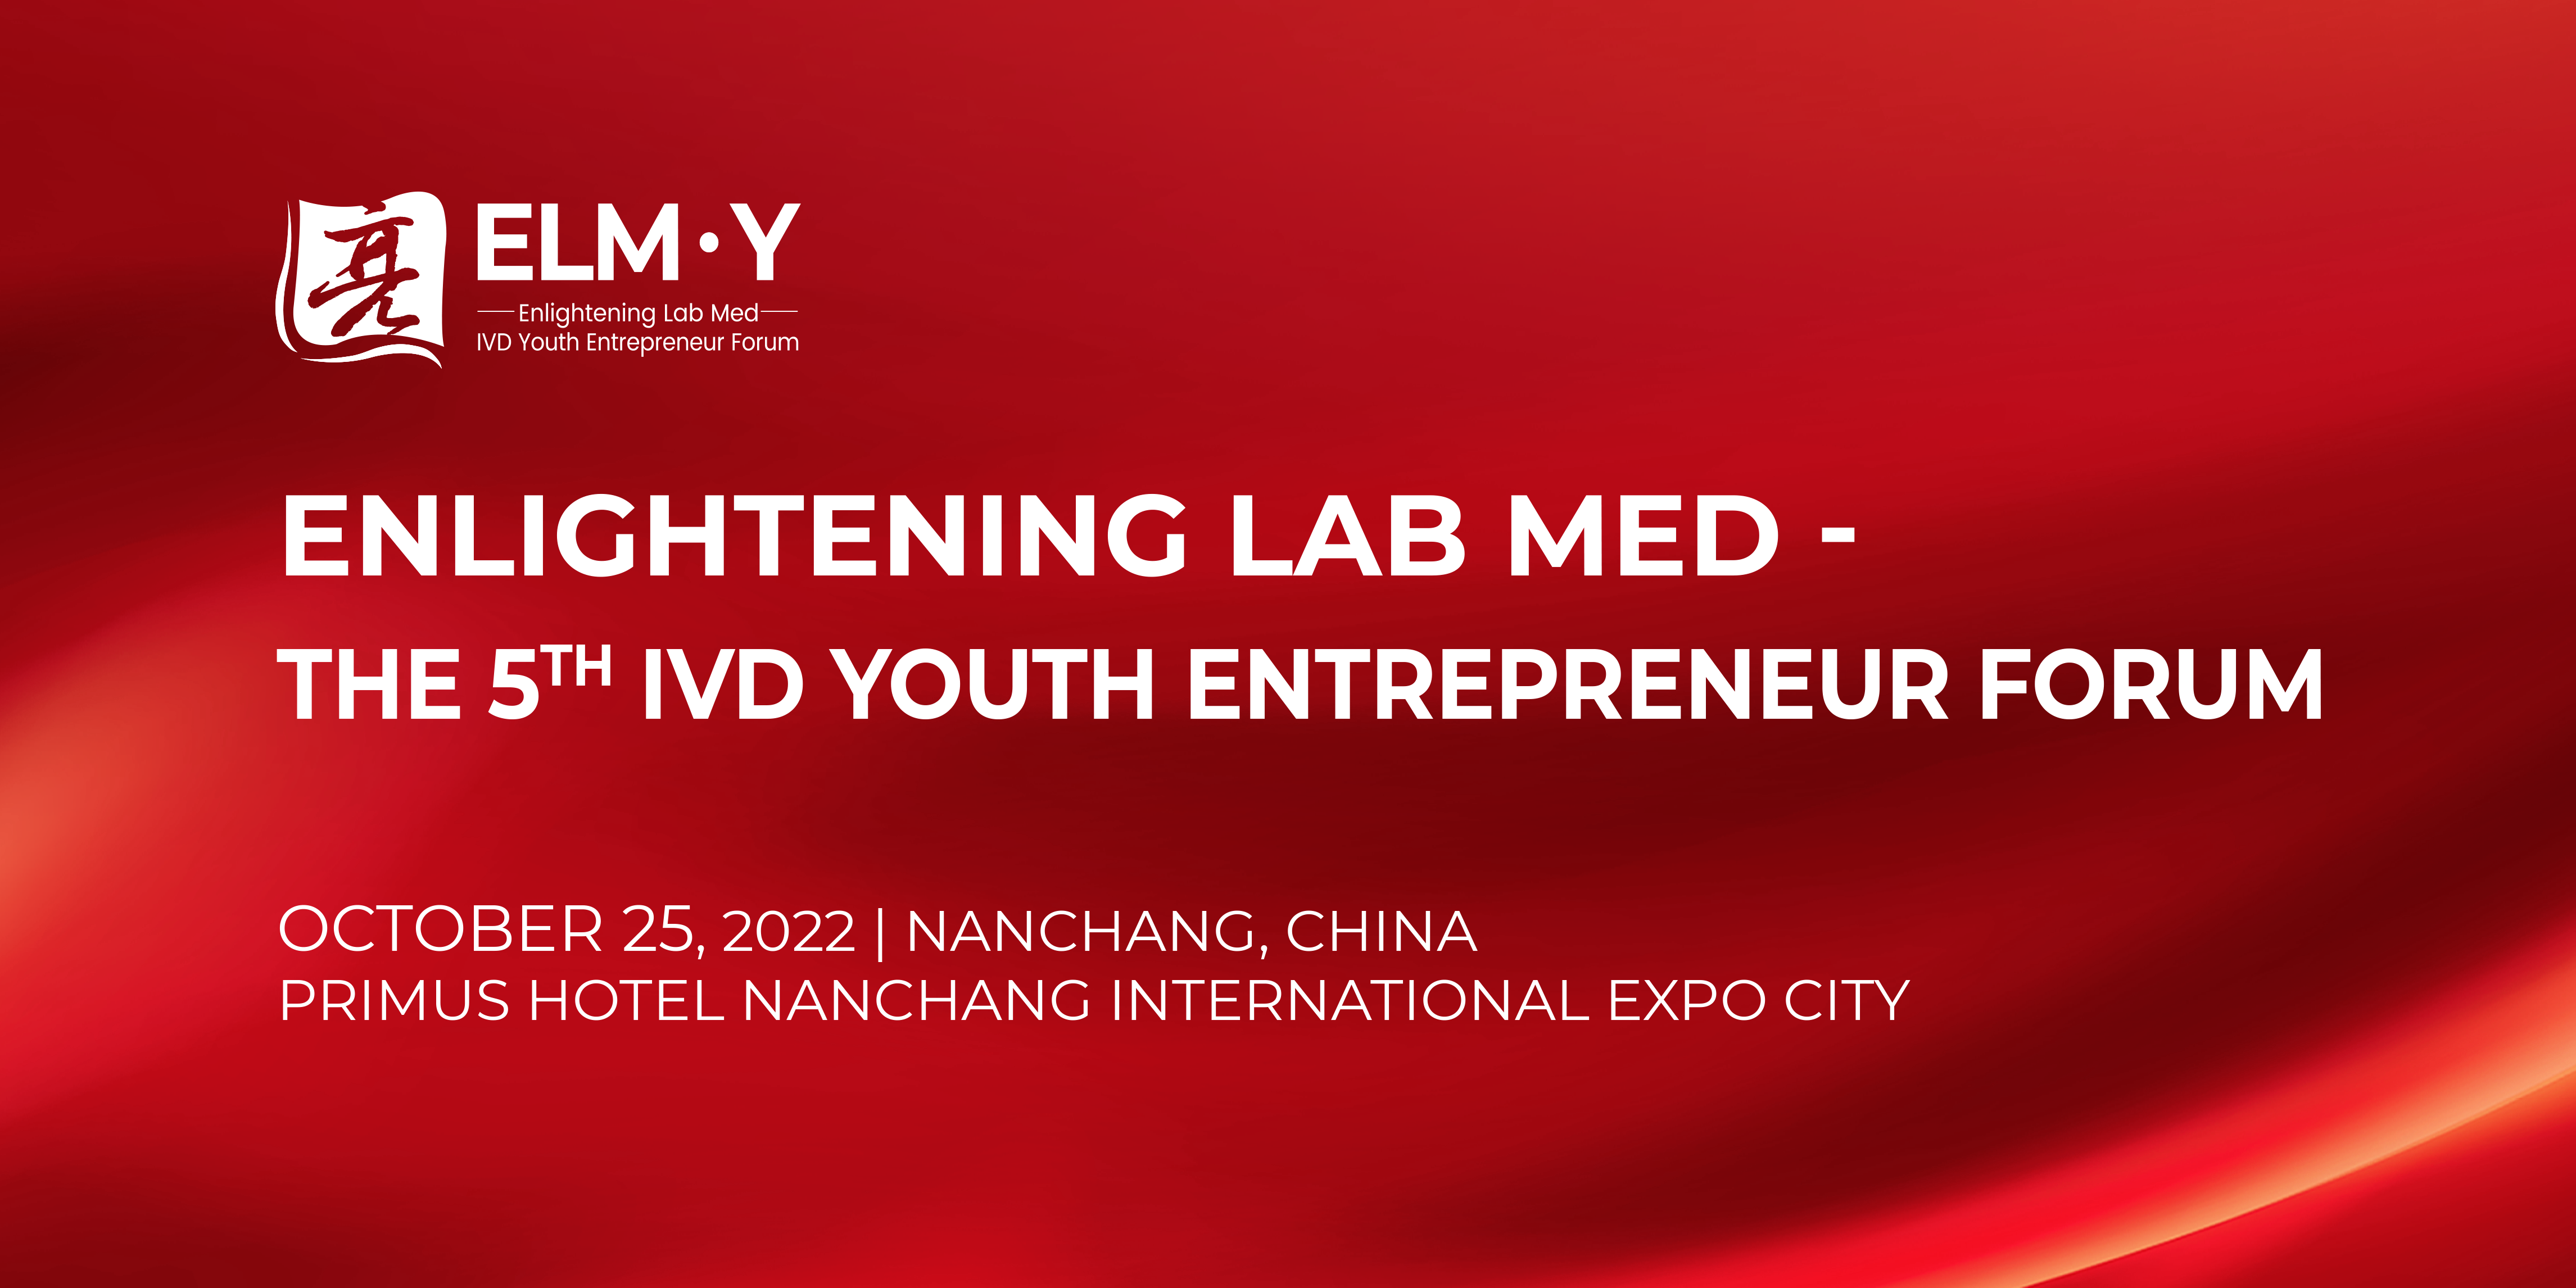 The Success of Enlightening Lab Med—the 5th Youth Entrepreneur Forum